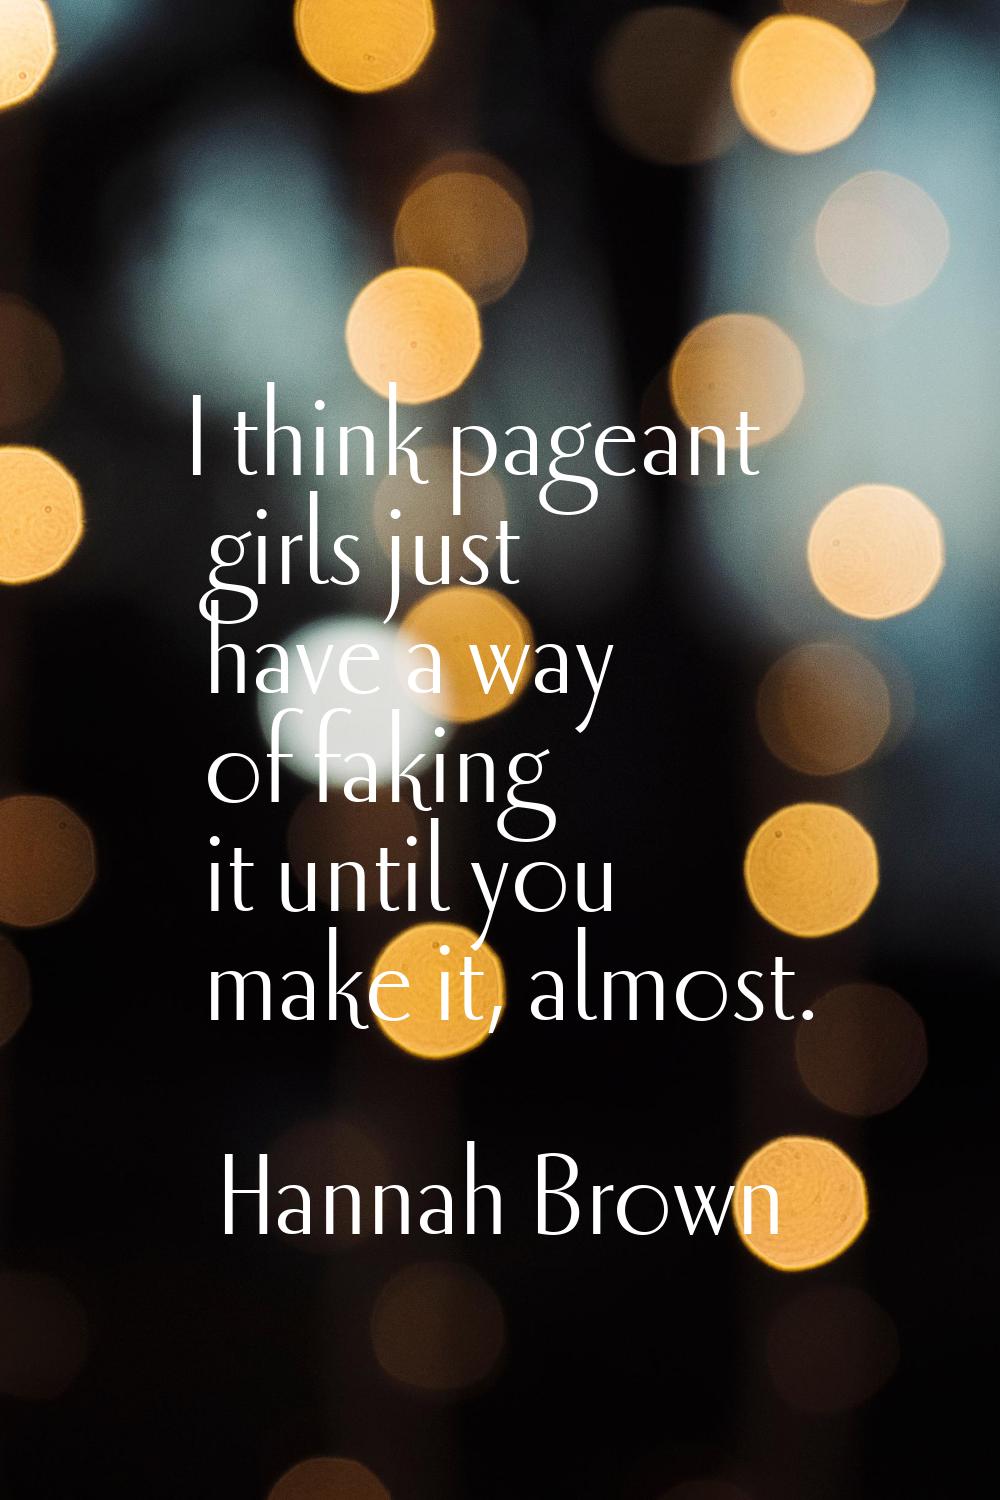 I think pageant girls just have a way of faking it until you make it, almost.